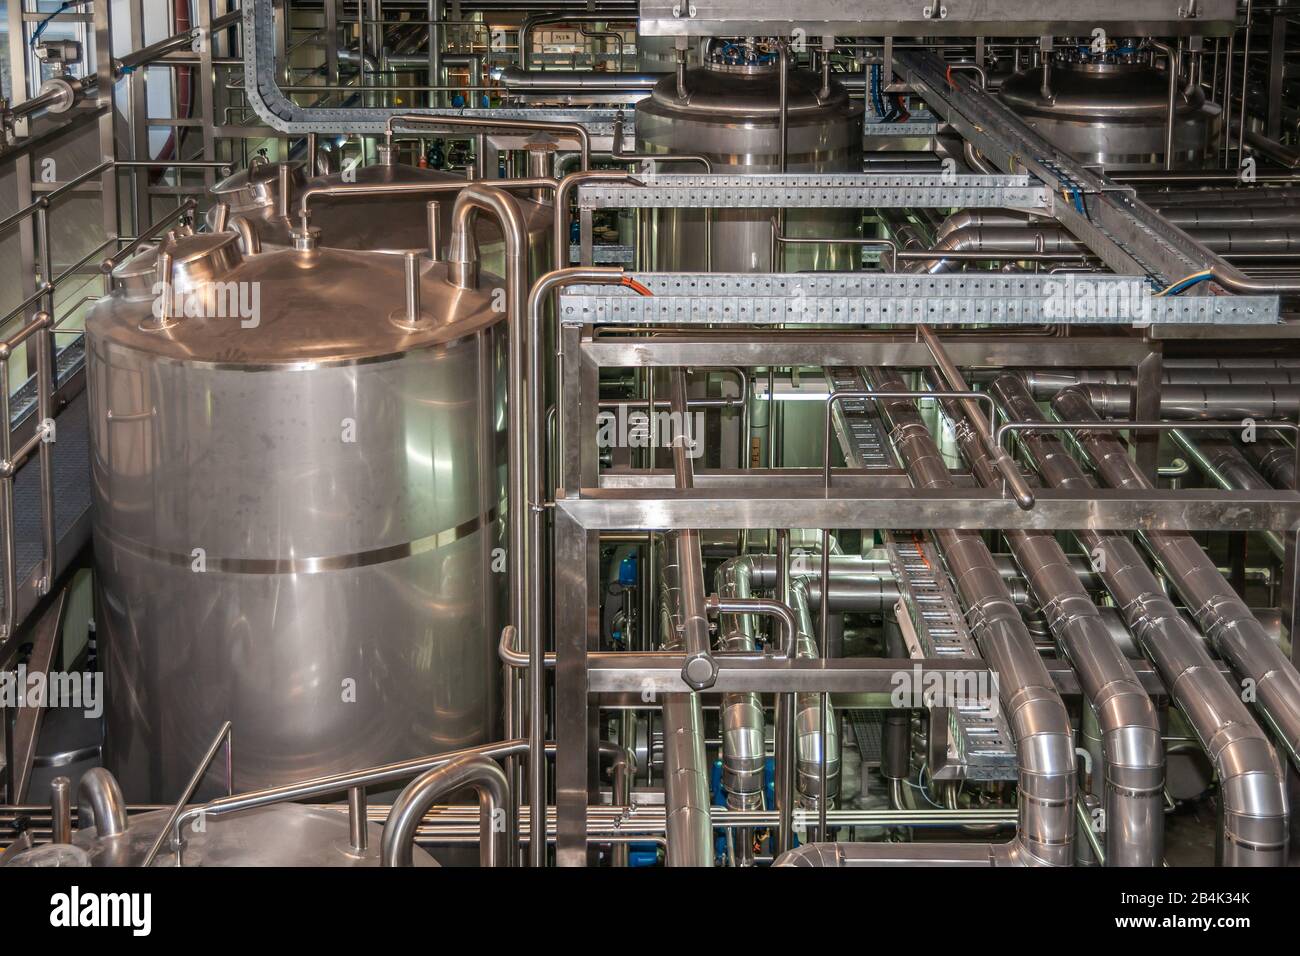 Brisbane, Australia - December 8, 2009: Castlemaine Perkins brewery. Intermediary tanks, plenty of pipelines for beer, water and CO2 in the filling pr Stock Photo